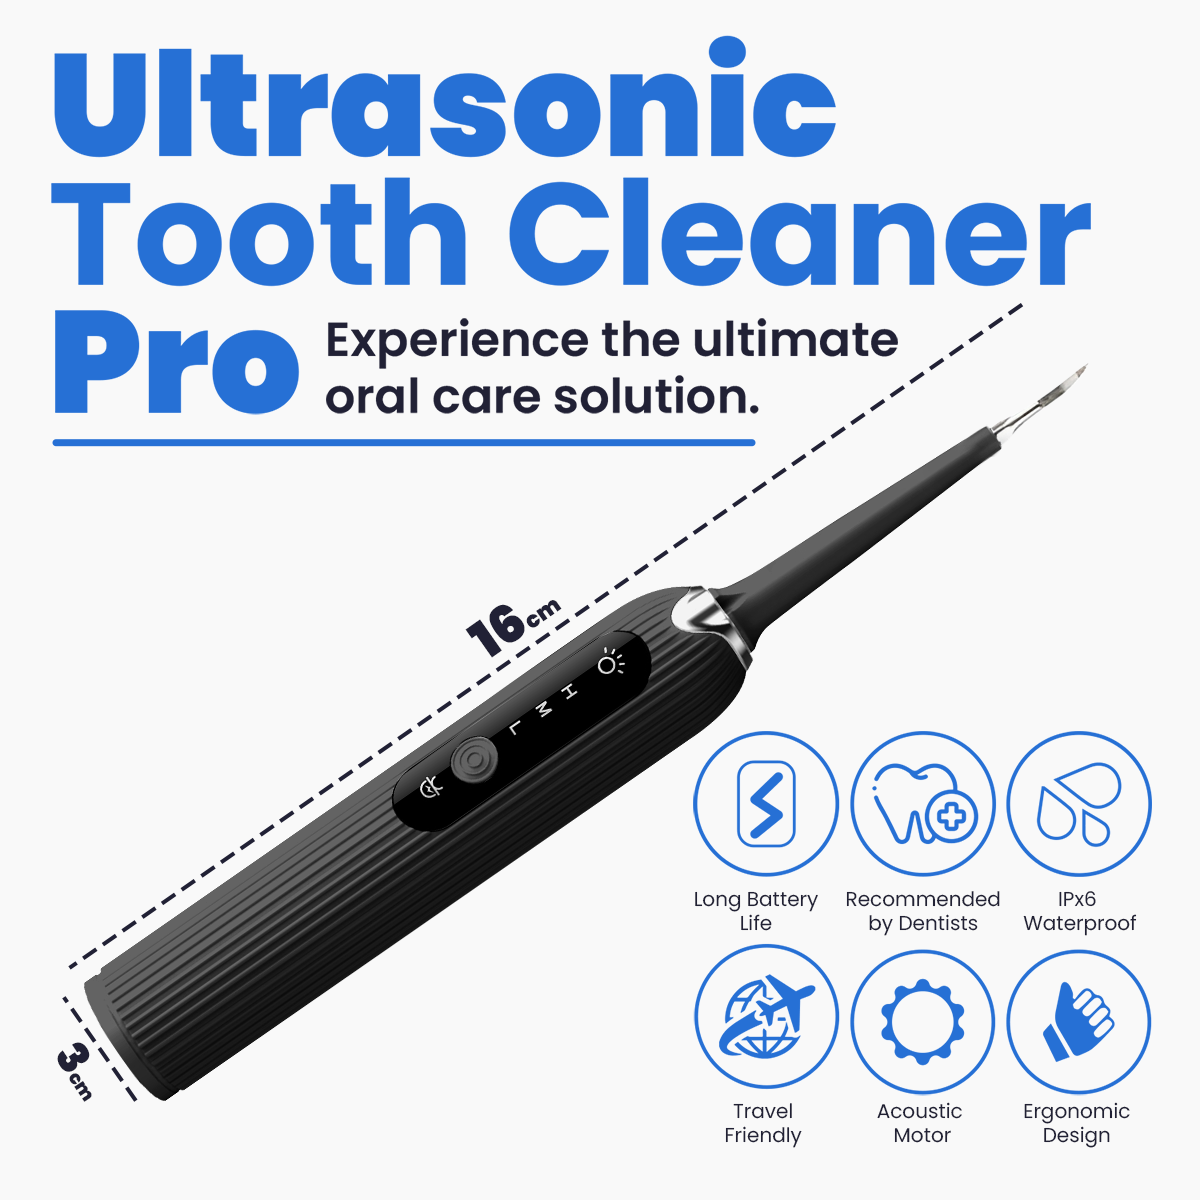 Ultrasonic Tooth Cleaner Pro